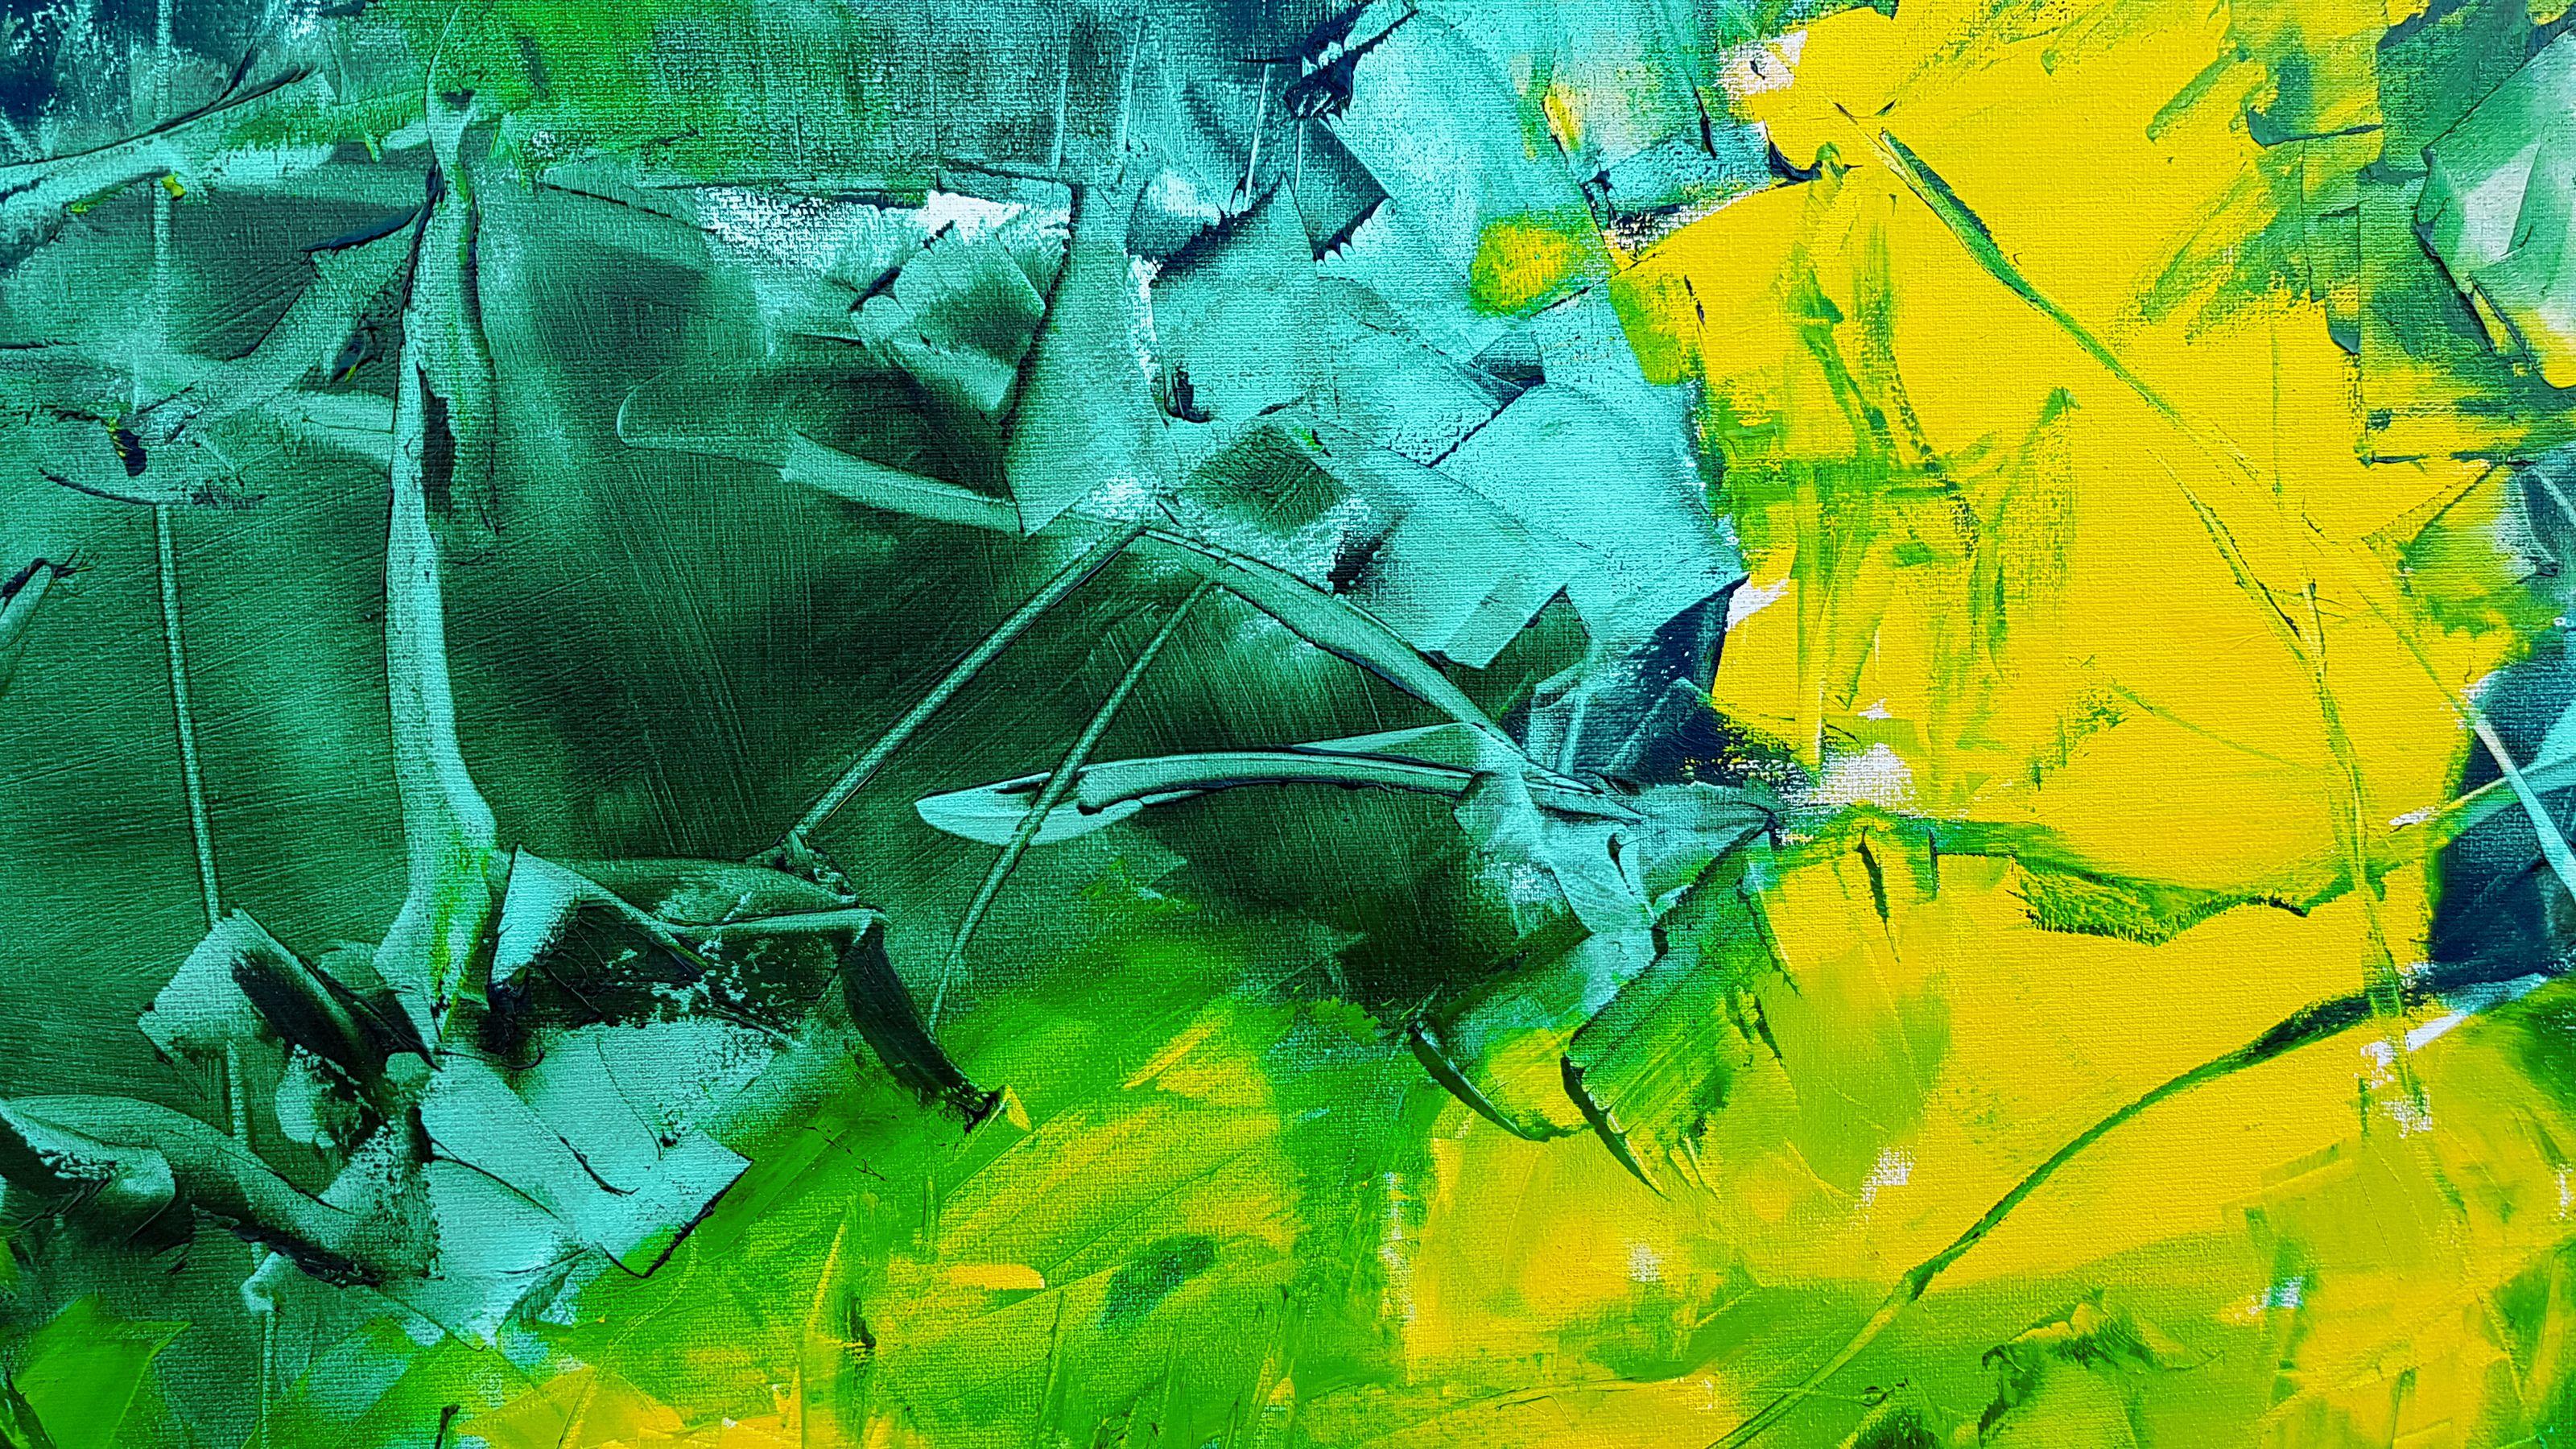 Abstract vibration in yellow and green, Painting, Oil on Canvas 2